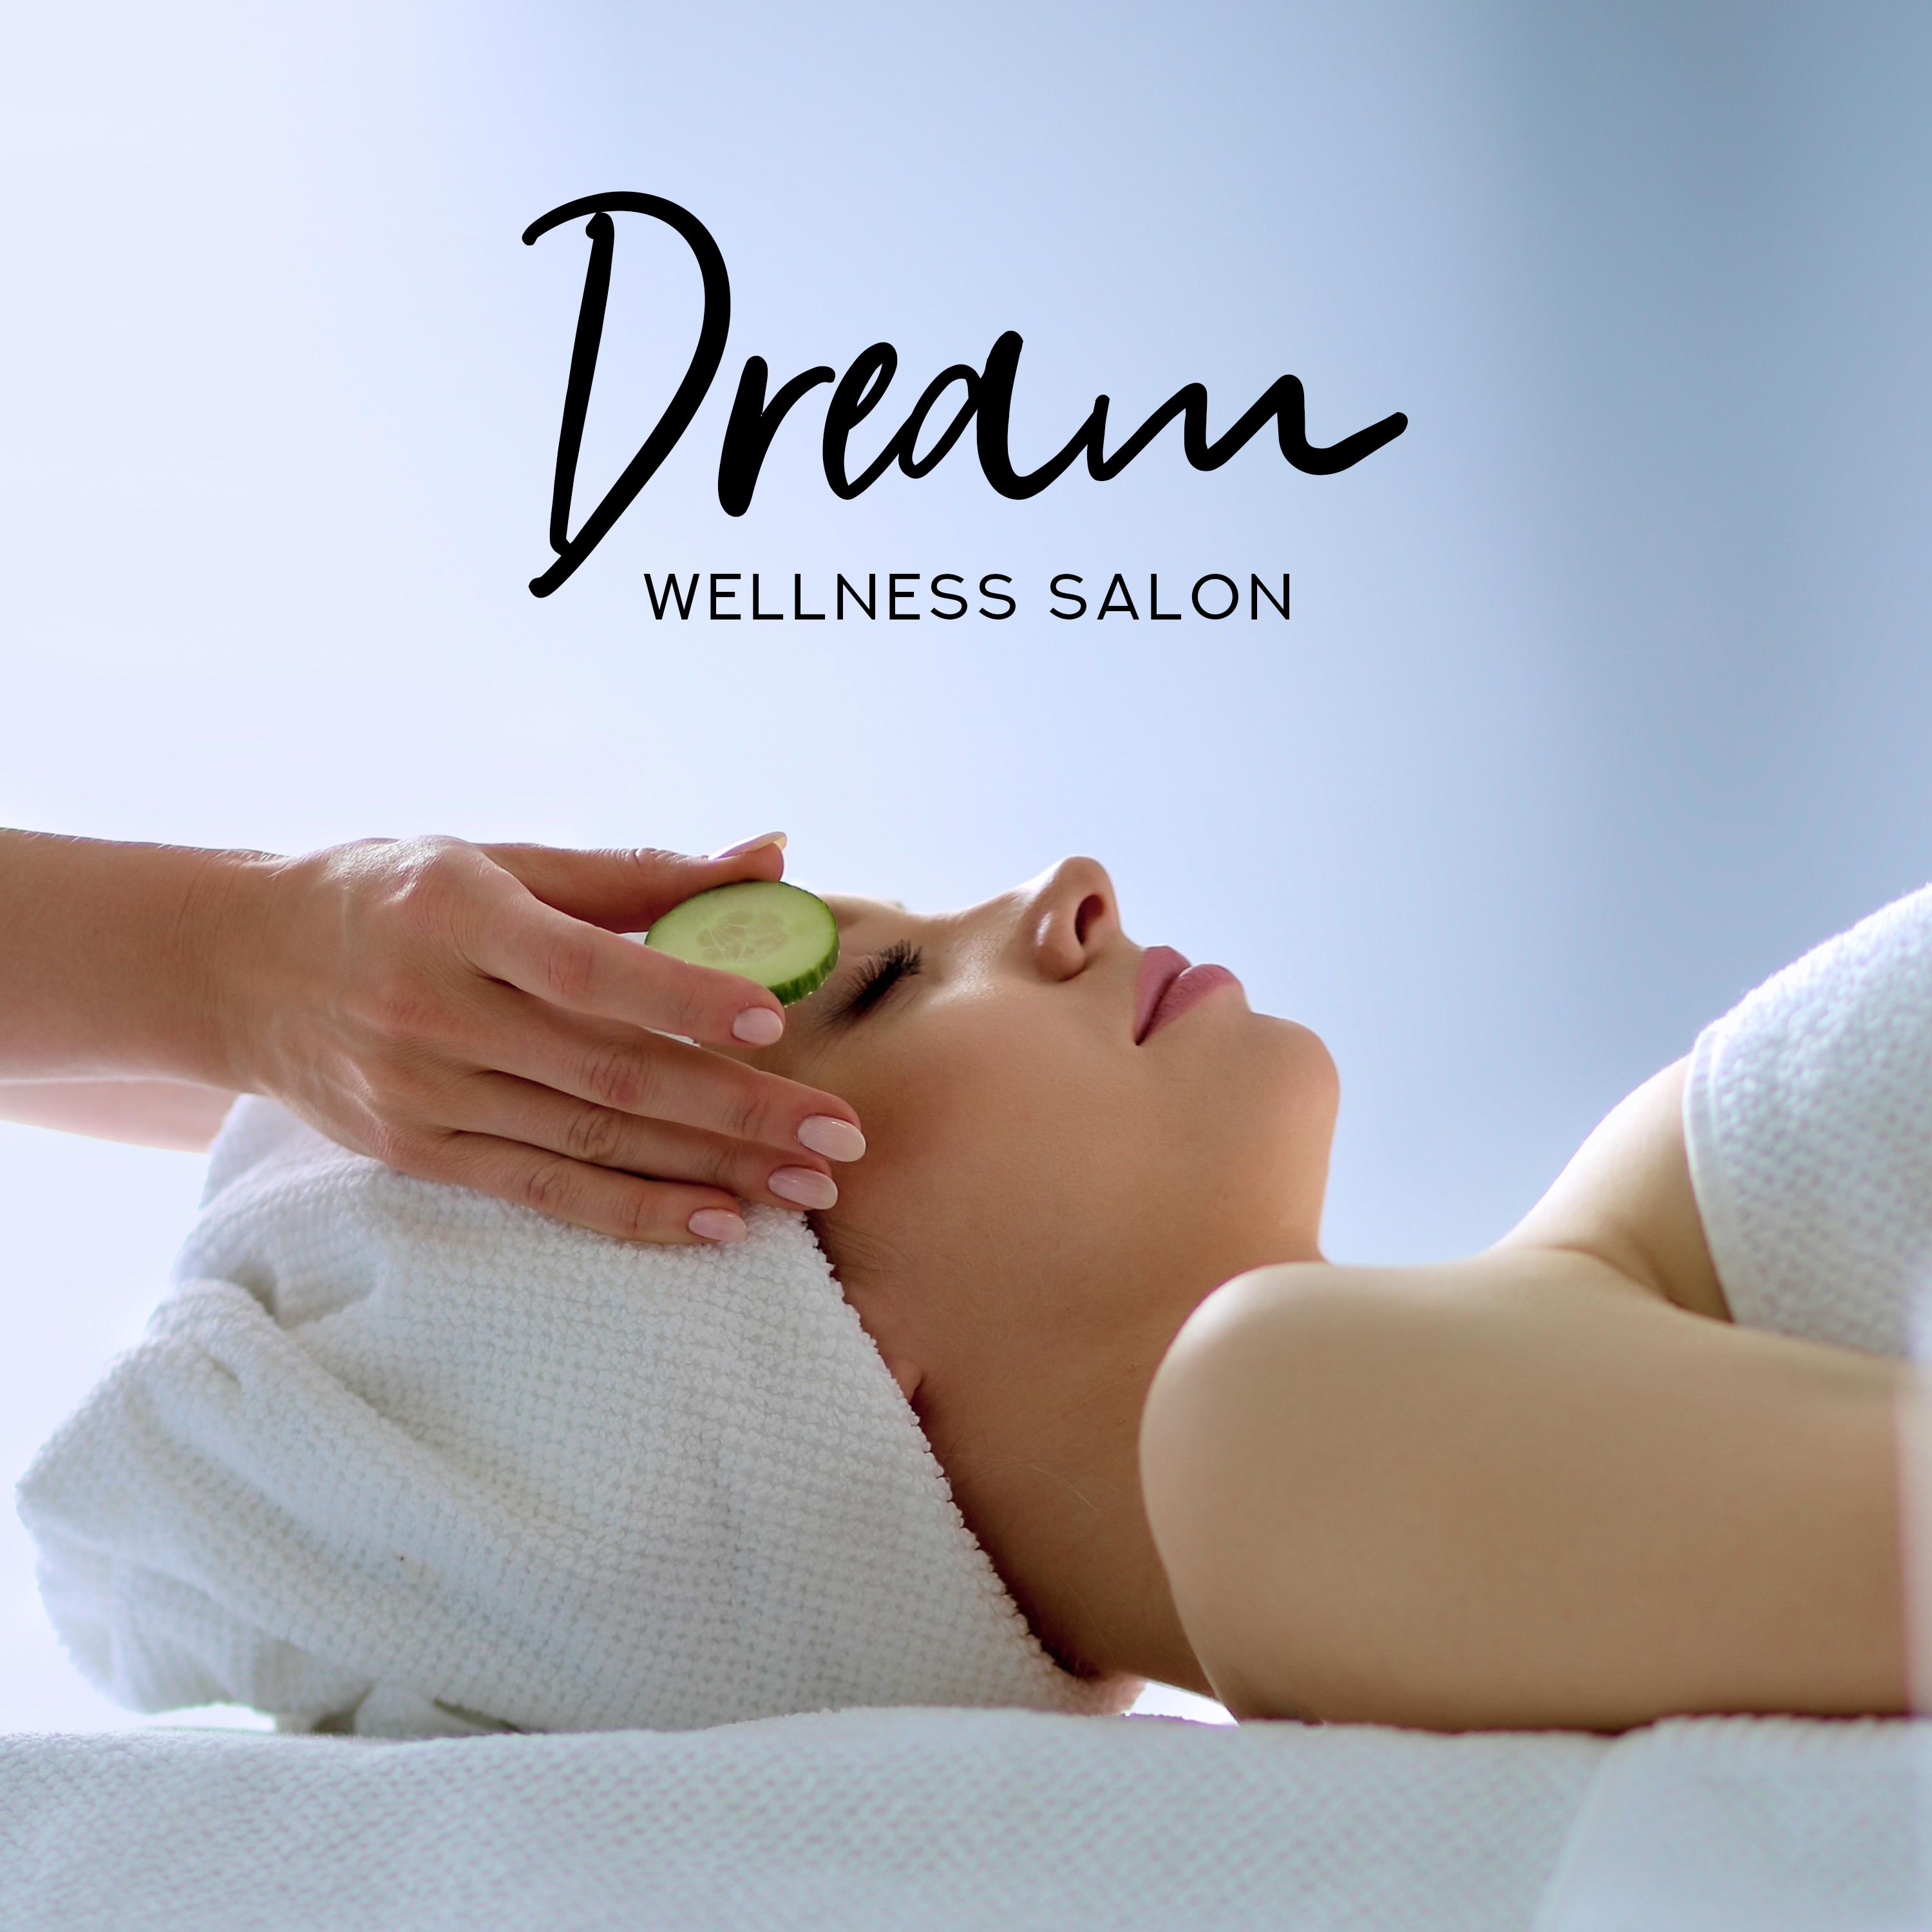 Dream Wellness Salon: New Age Soothing Soft Music for Spa Salon, Wellness, Hot Baths, Tibetan Massage Therapy, Perfect Relaxation